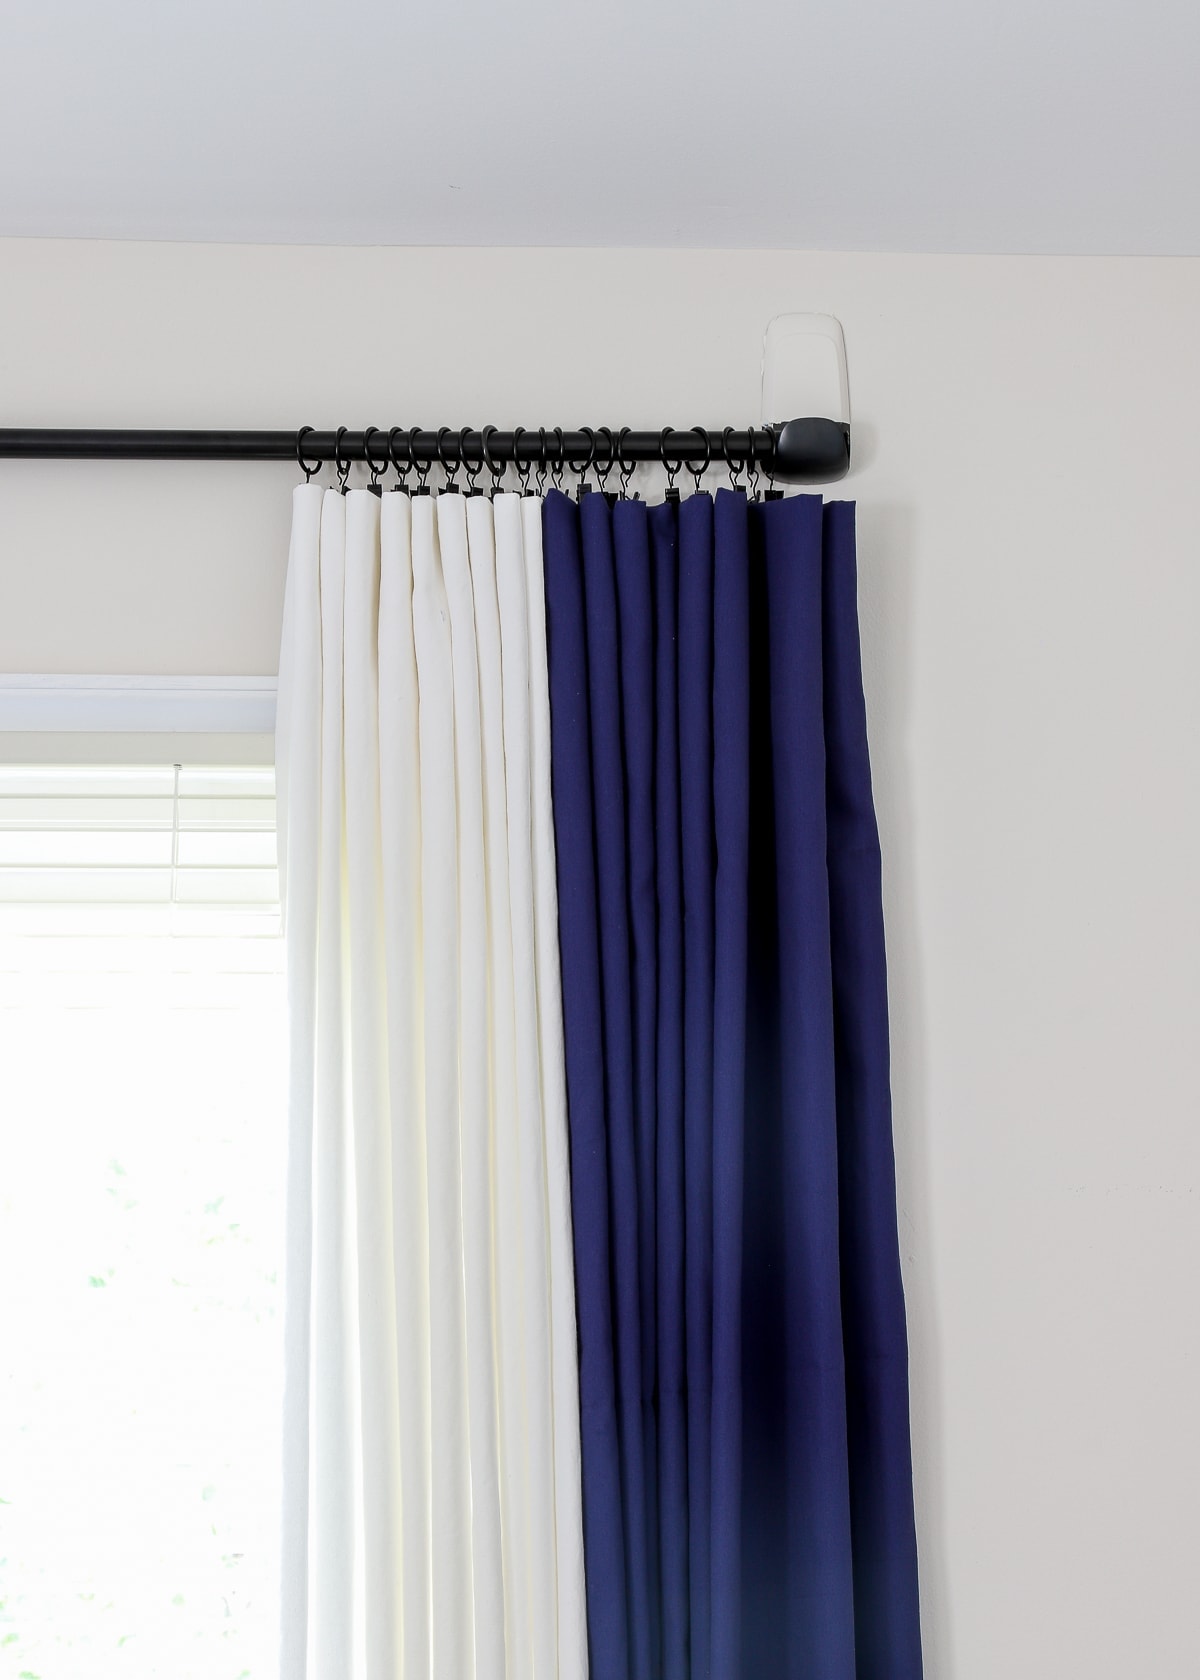 Curtain Rod Without Drilling, How To Hang Up Curtains With Command Hooks